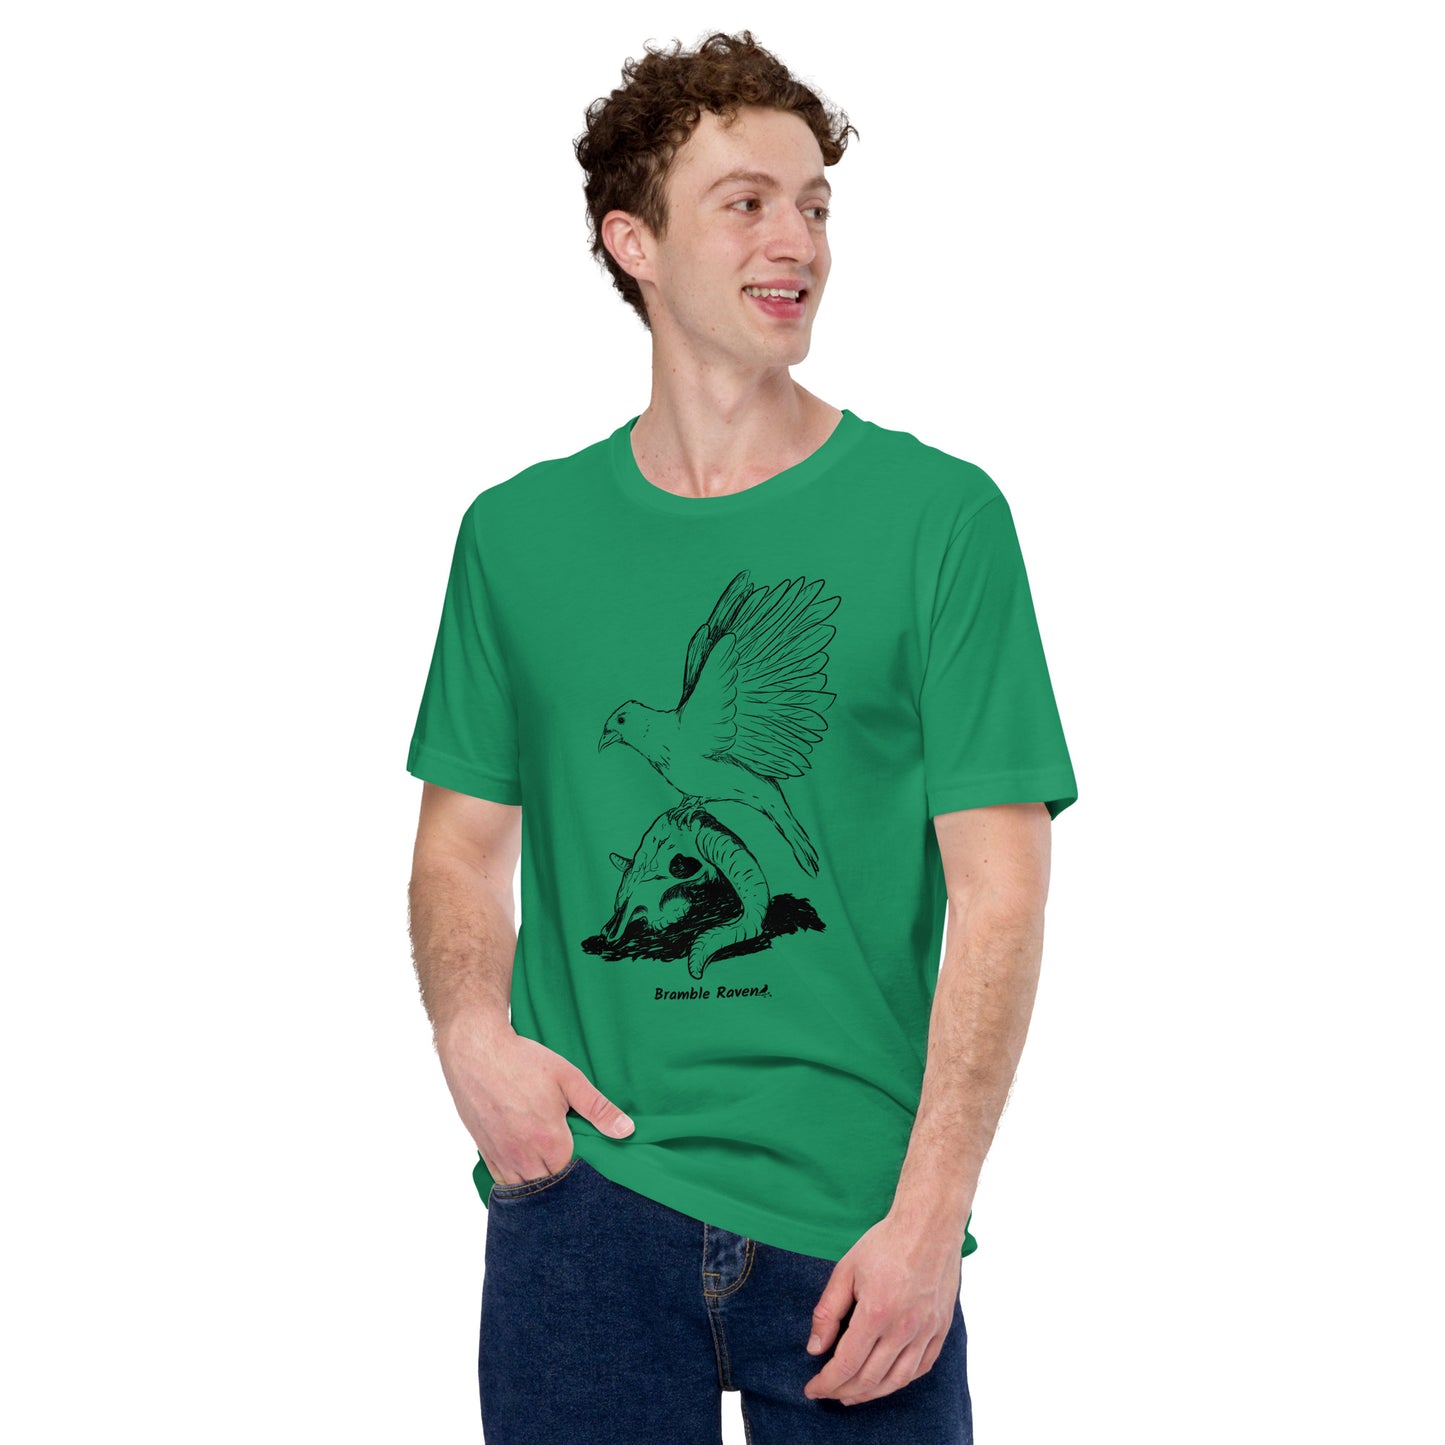 Kelly green colored unisex t-shirt. Features Reflections illustration of a crow with wings outstretched sitting on a sheep skull. Shown on male model.